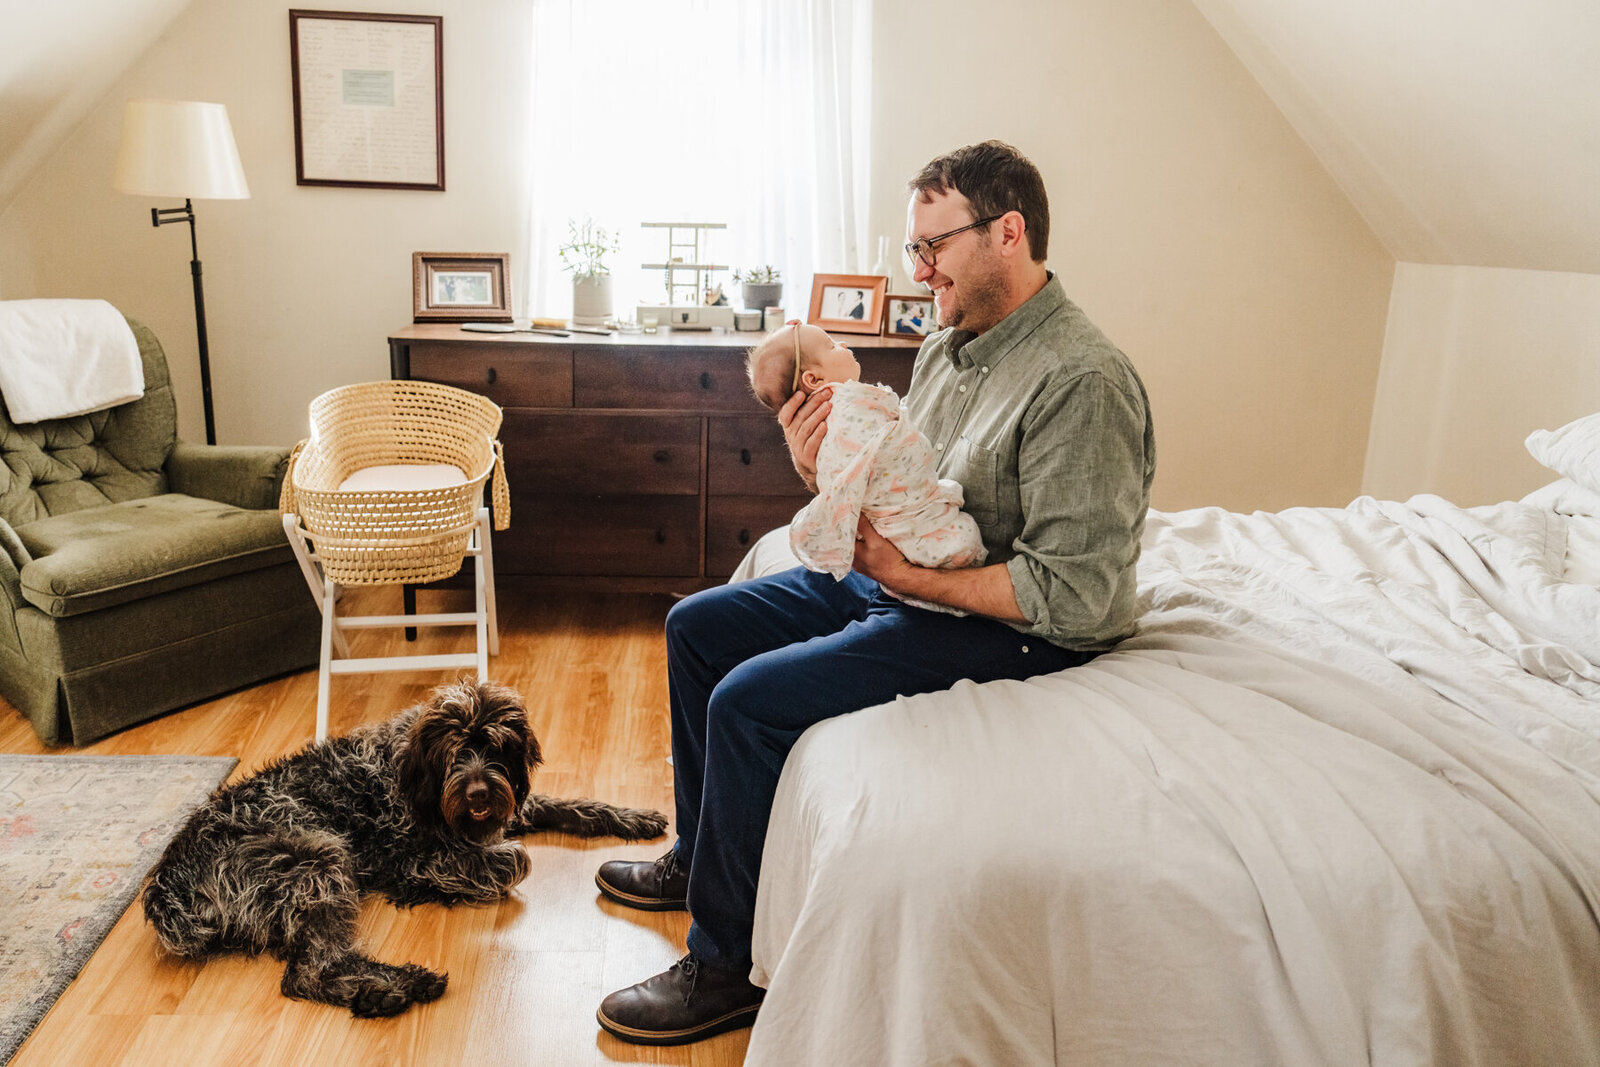 dad sits on master bed holding baby girl while brown dog looks on